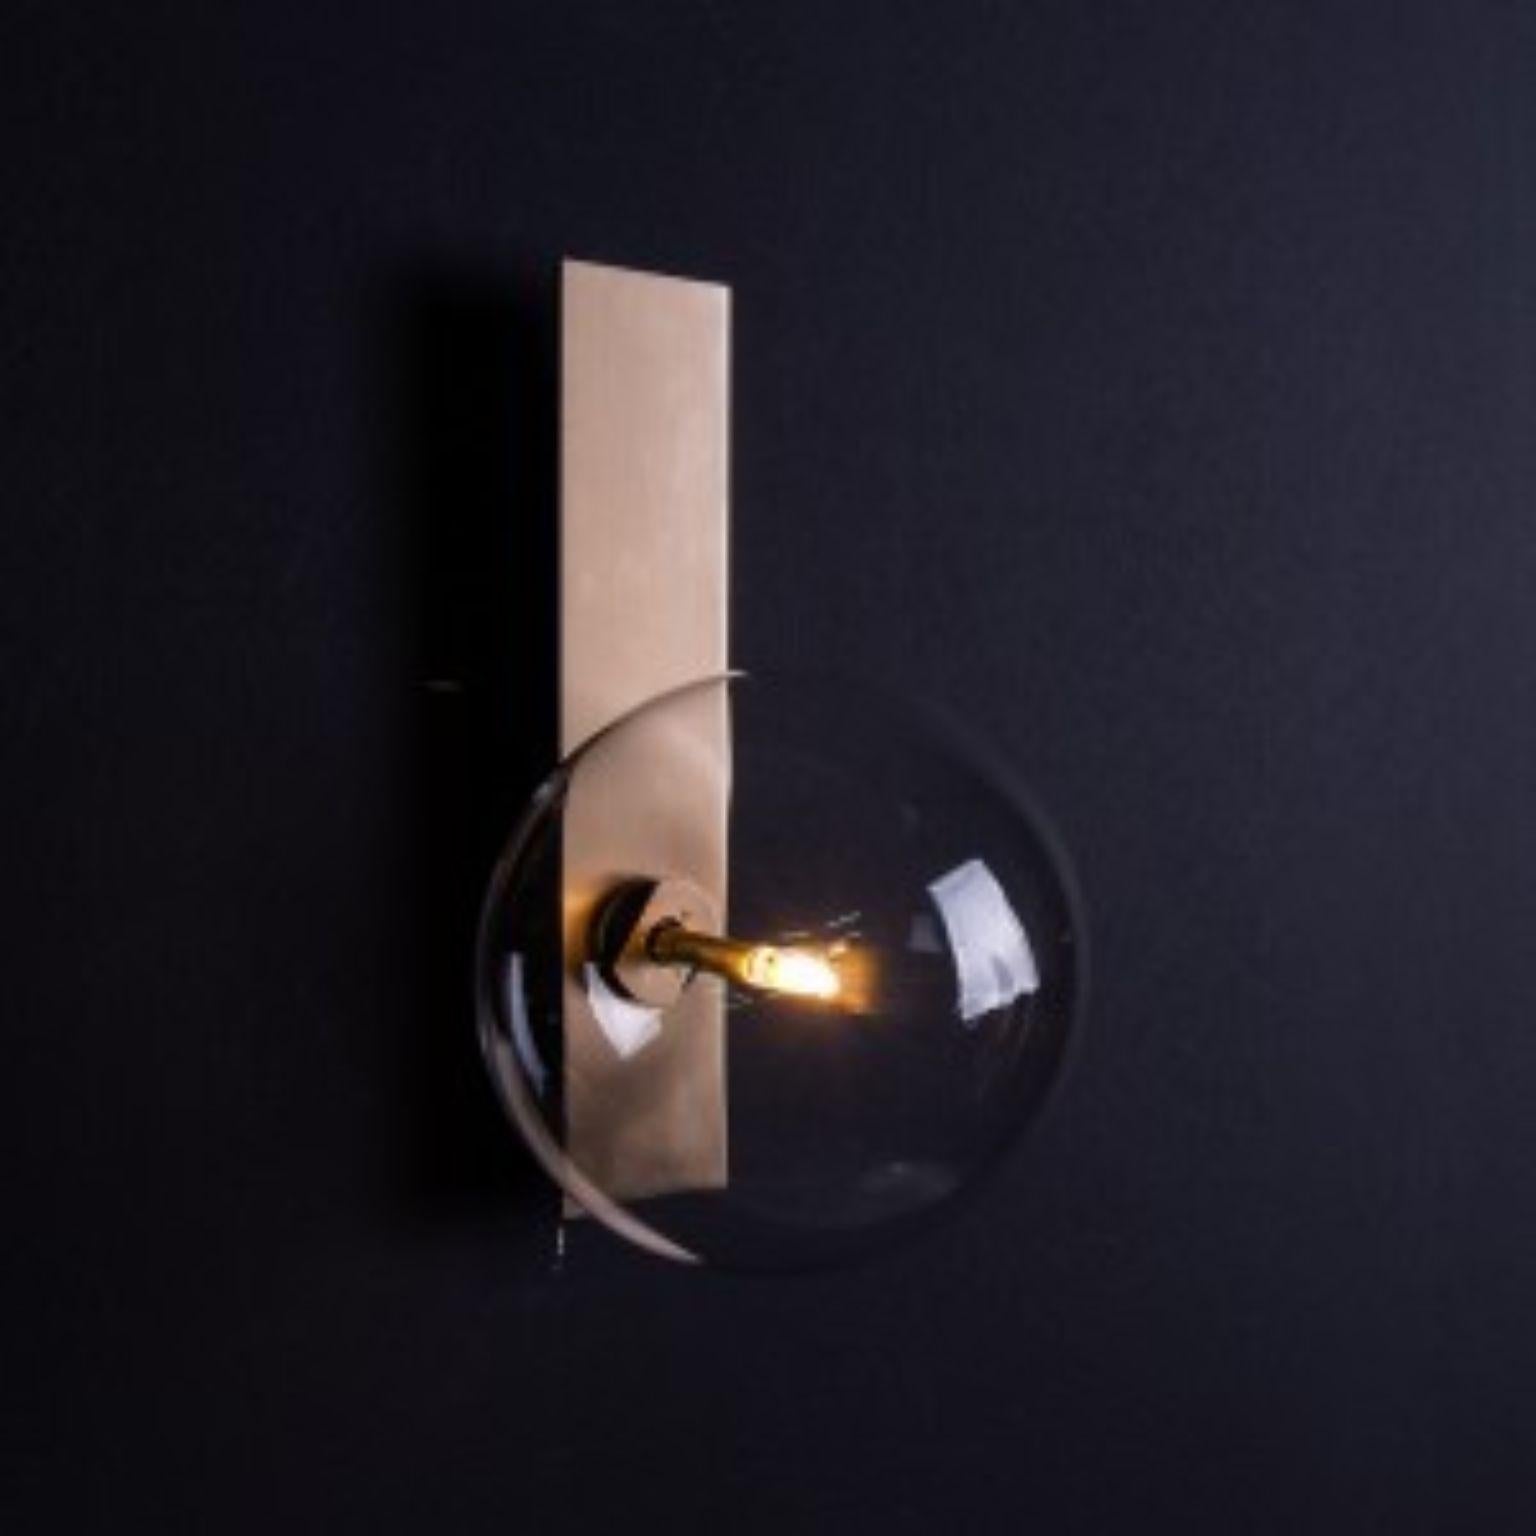 Oslo Brass Wall Sconce by Schwung
Dimensions: W 15 x D 19 x H 26 cm
Materials: Brass, hand blown glass globes

Finishes available: Black gunmetal, polished nickel, brass


Schwung is a German word, and loosely defined, means energy or momentumm of a